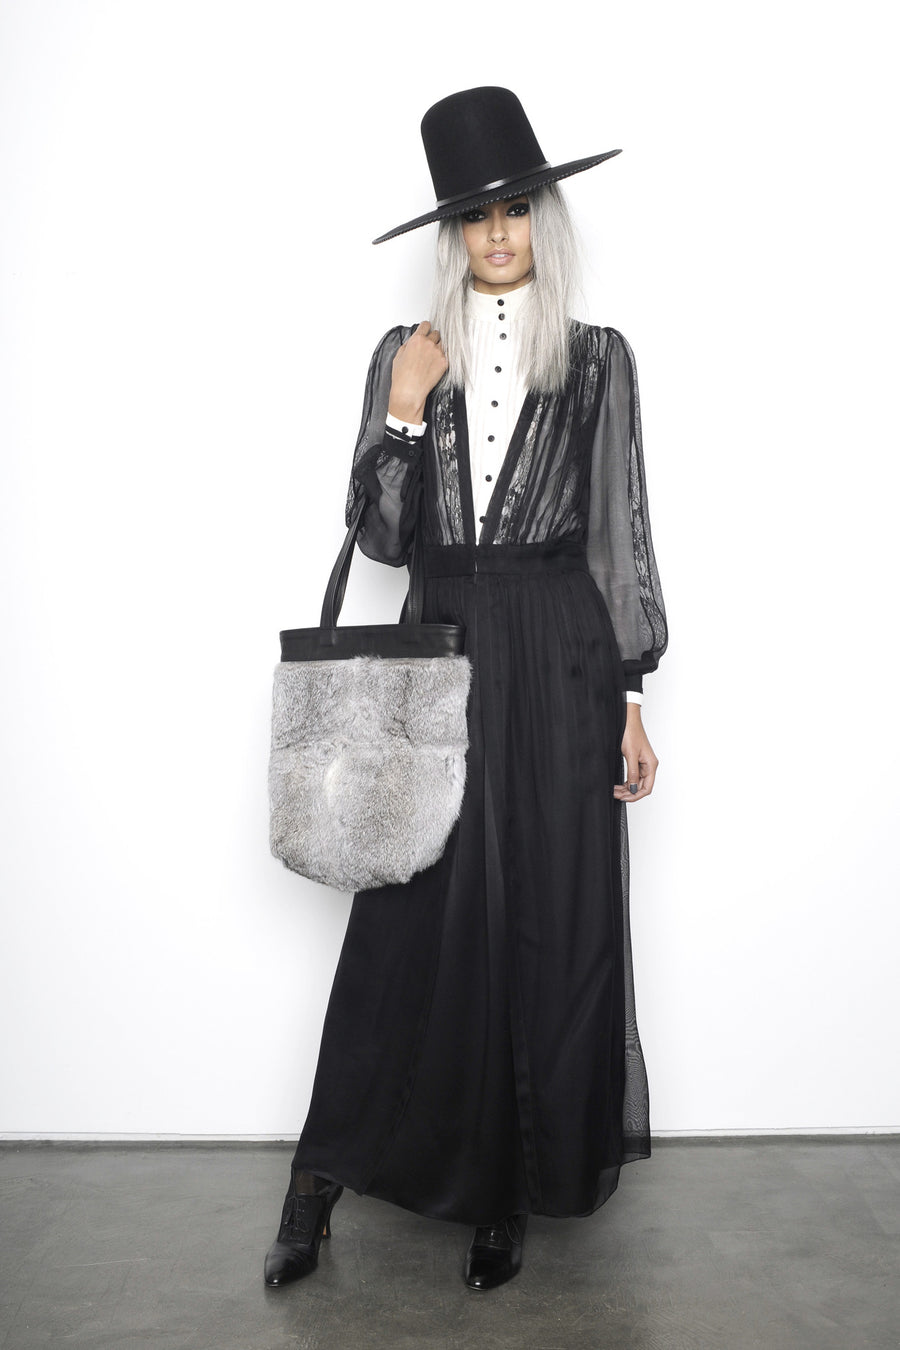 Gisele Oliveria IMG model fashion Runway show Wendy Nichol AW15 Queen of Thieves witch Sheer Black Deep V Inset Lace Dress Coat White High Collar Button Shirt Gray Grey Hair Wide Brim Whipstitch Witch Hat Rabbit Fur Tote Custom Tailoring Color Fabric Made to Measure Order Handmade in NYC 